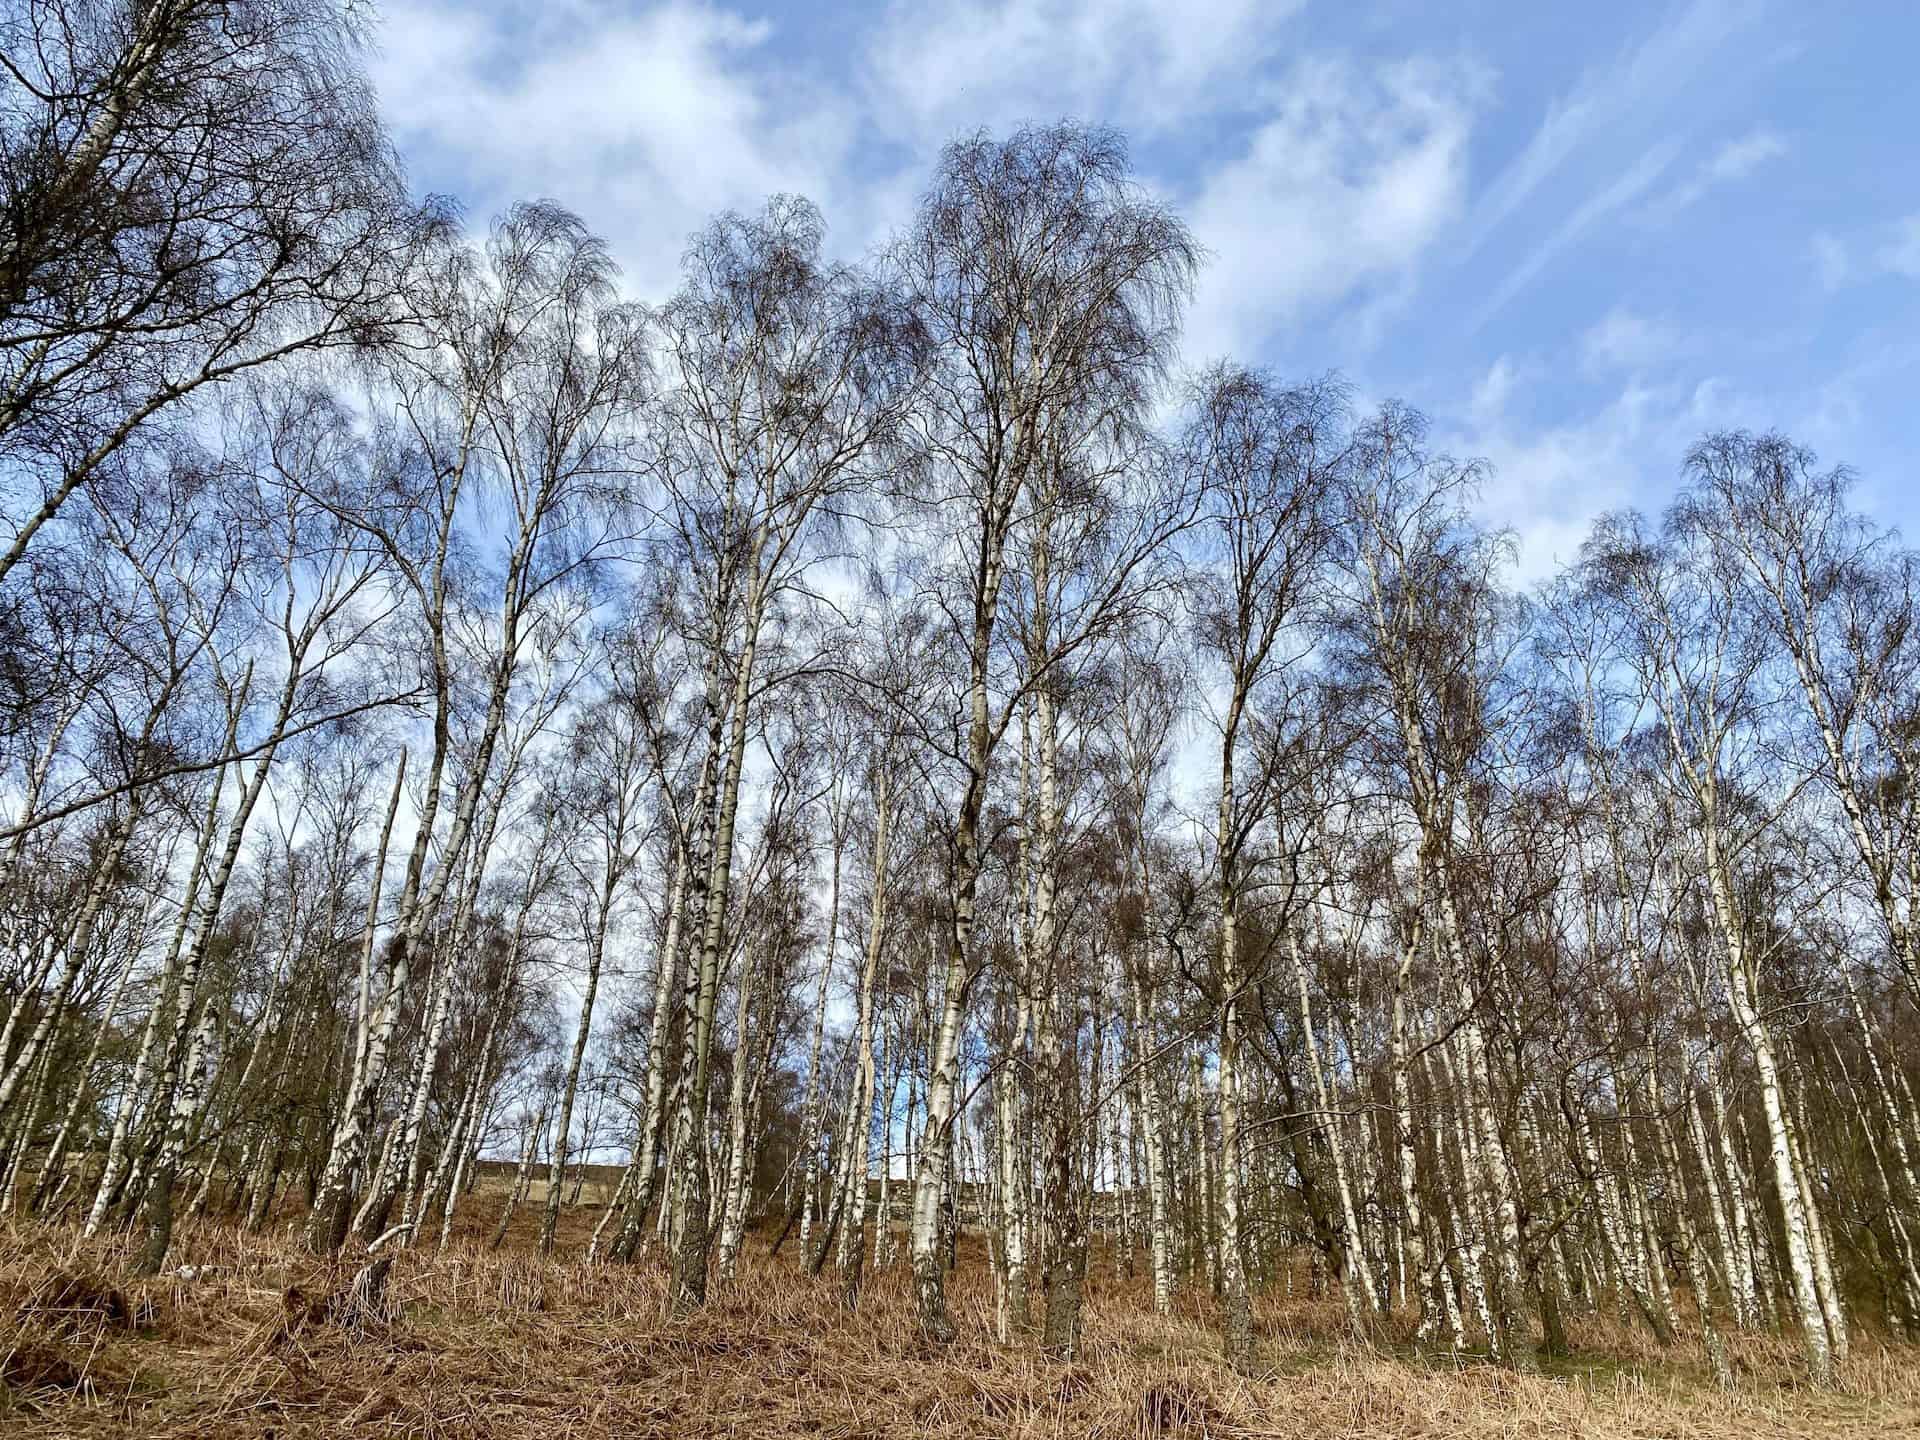 Silver birch (Betula pendula) woodland. Silver birch trees are slender, fast-growing, and reach a height of about 30 metres, forming a light, airy canopy.